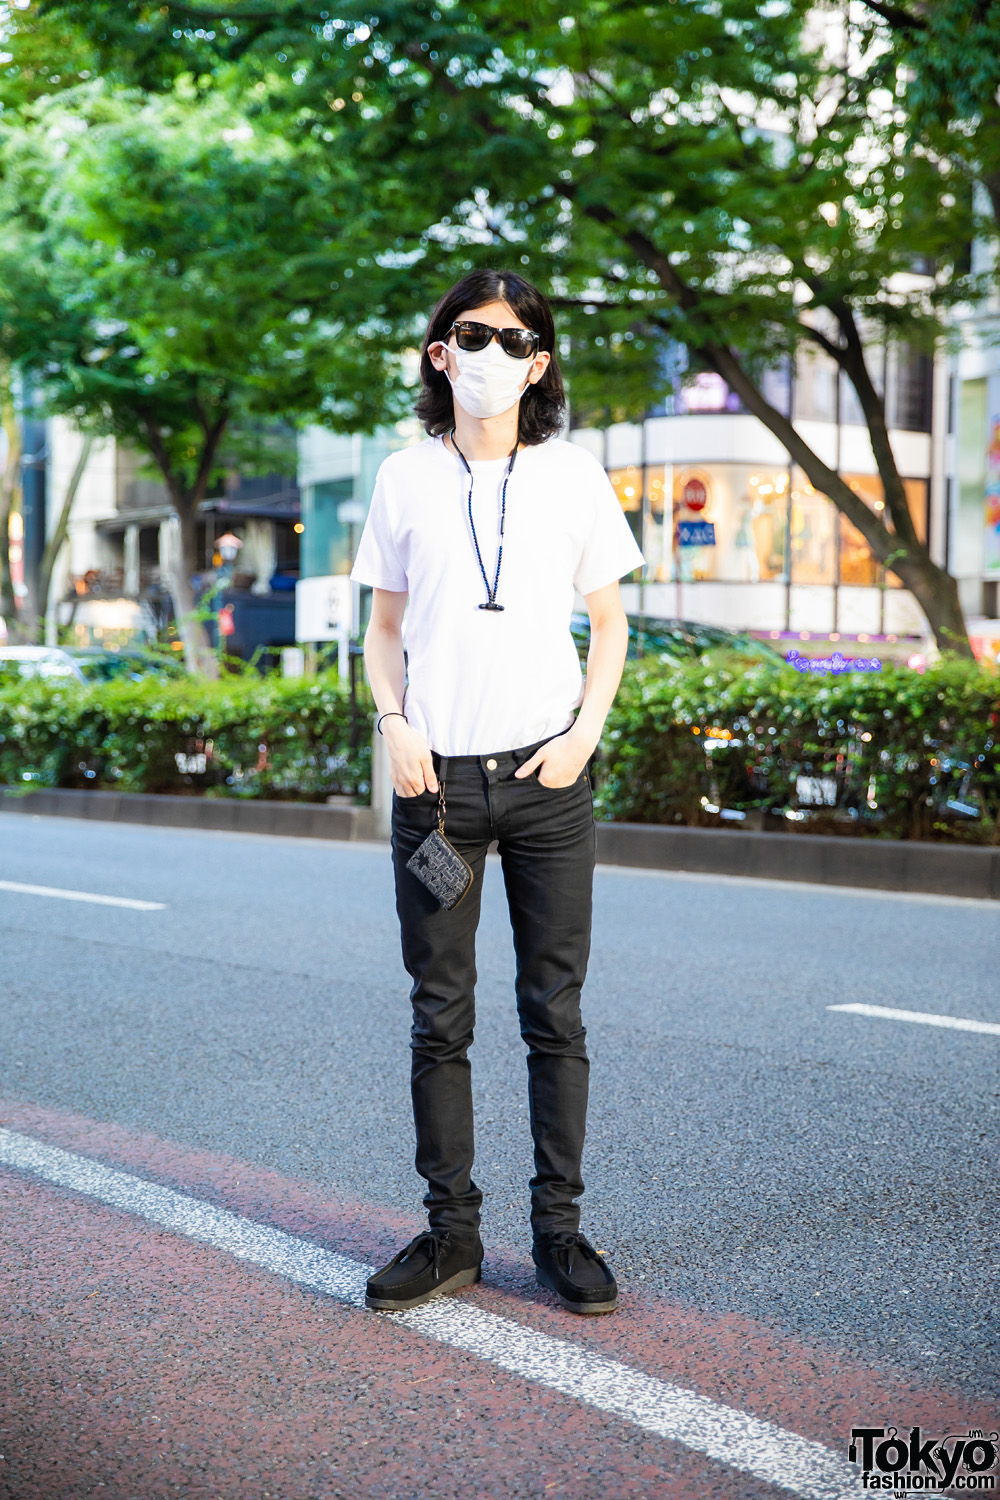 lokalisere Smidighed mammal Monochrome Street Style in Tokyo w/ Uniqlo Sunglasses, Hanes Plain White  Tee, Christopher Nemeth Coin Purse, Saint Laurent Skinny Jeans & Clarks  Wallabee Boots – Tokyo Fashion